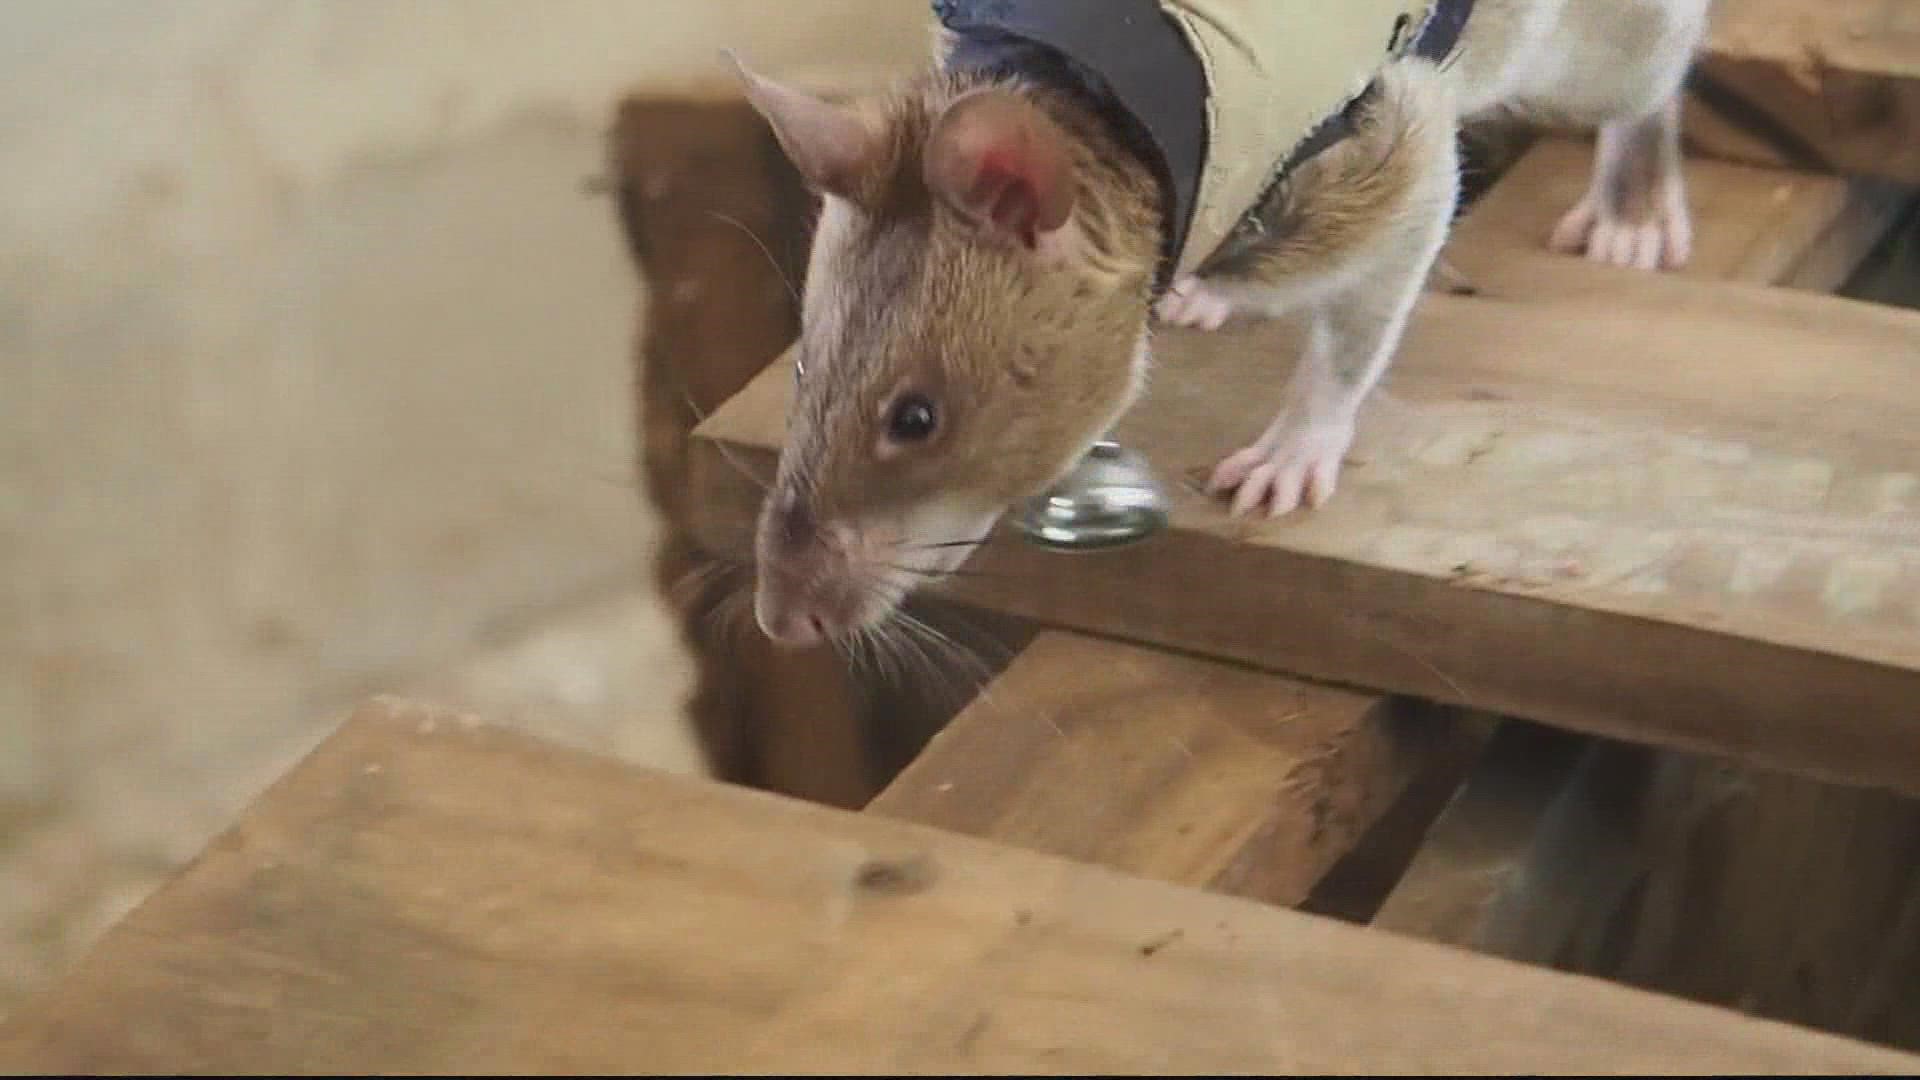 Thanks to non-profit Apopo, rats are being trained to help first responders find suvivors in the rubble after natural disaster